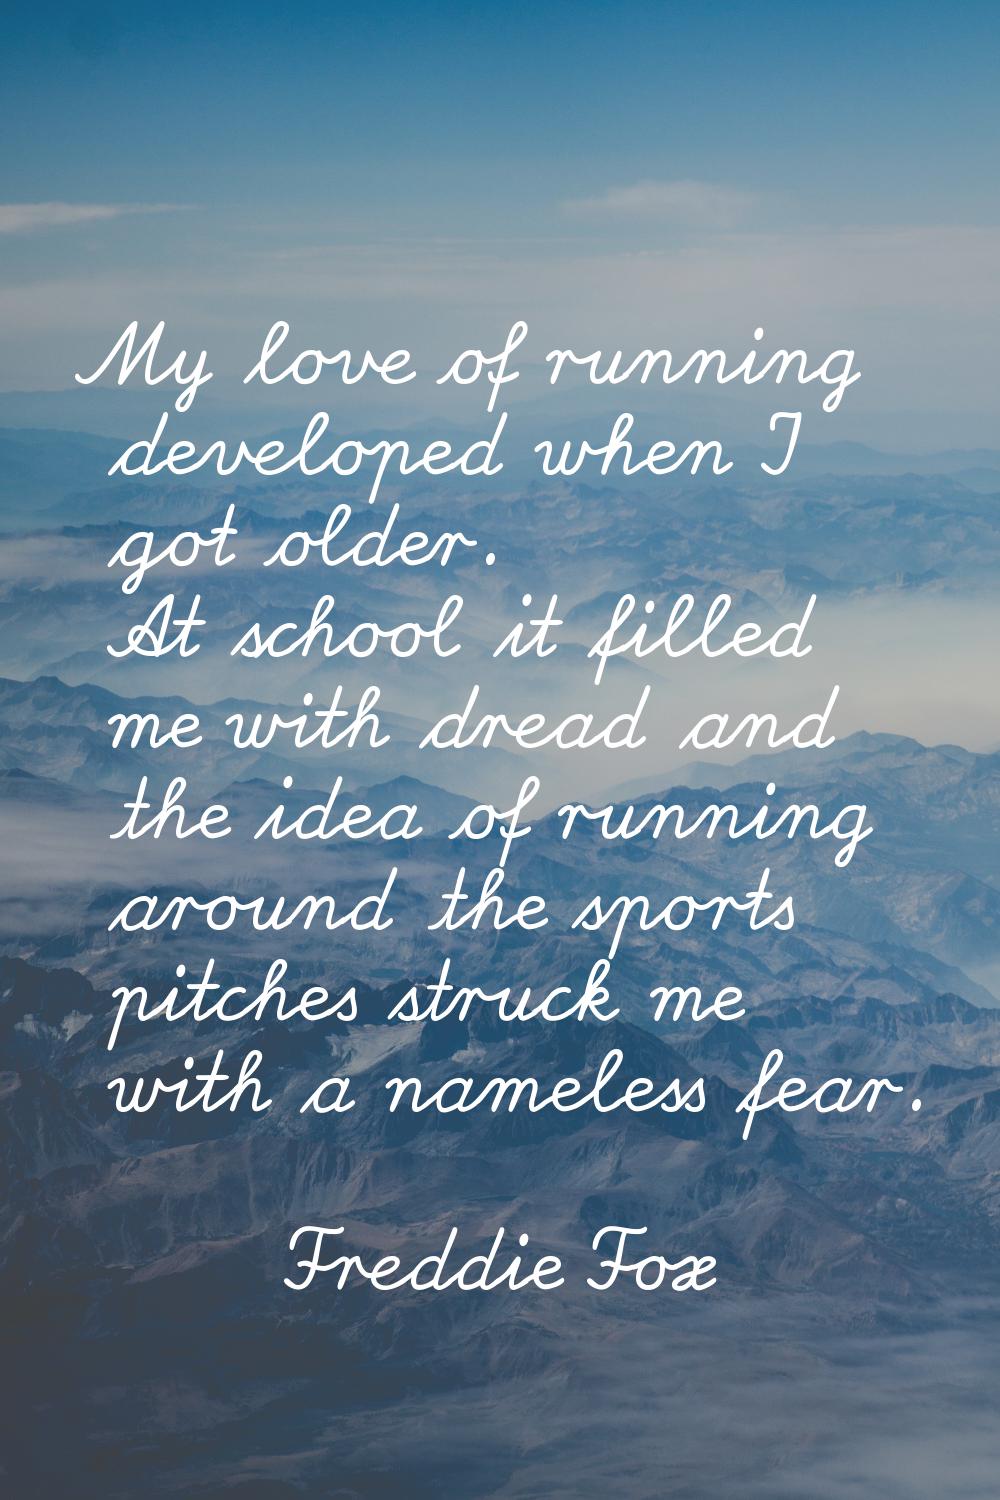 My love of running developed when I got older. At school it filled me with dread and the idea of ru